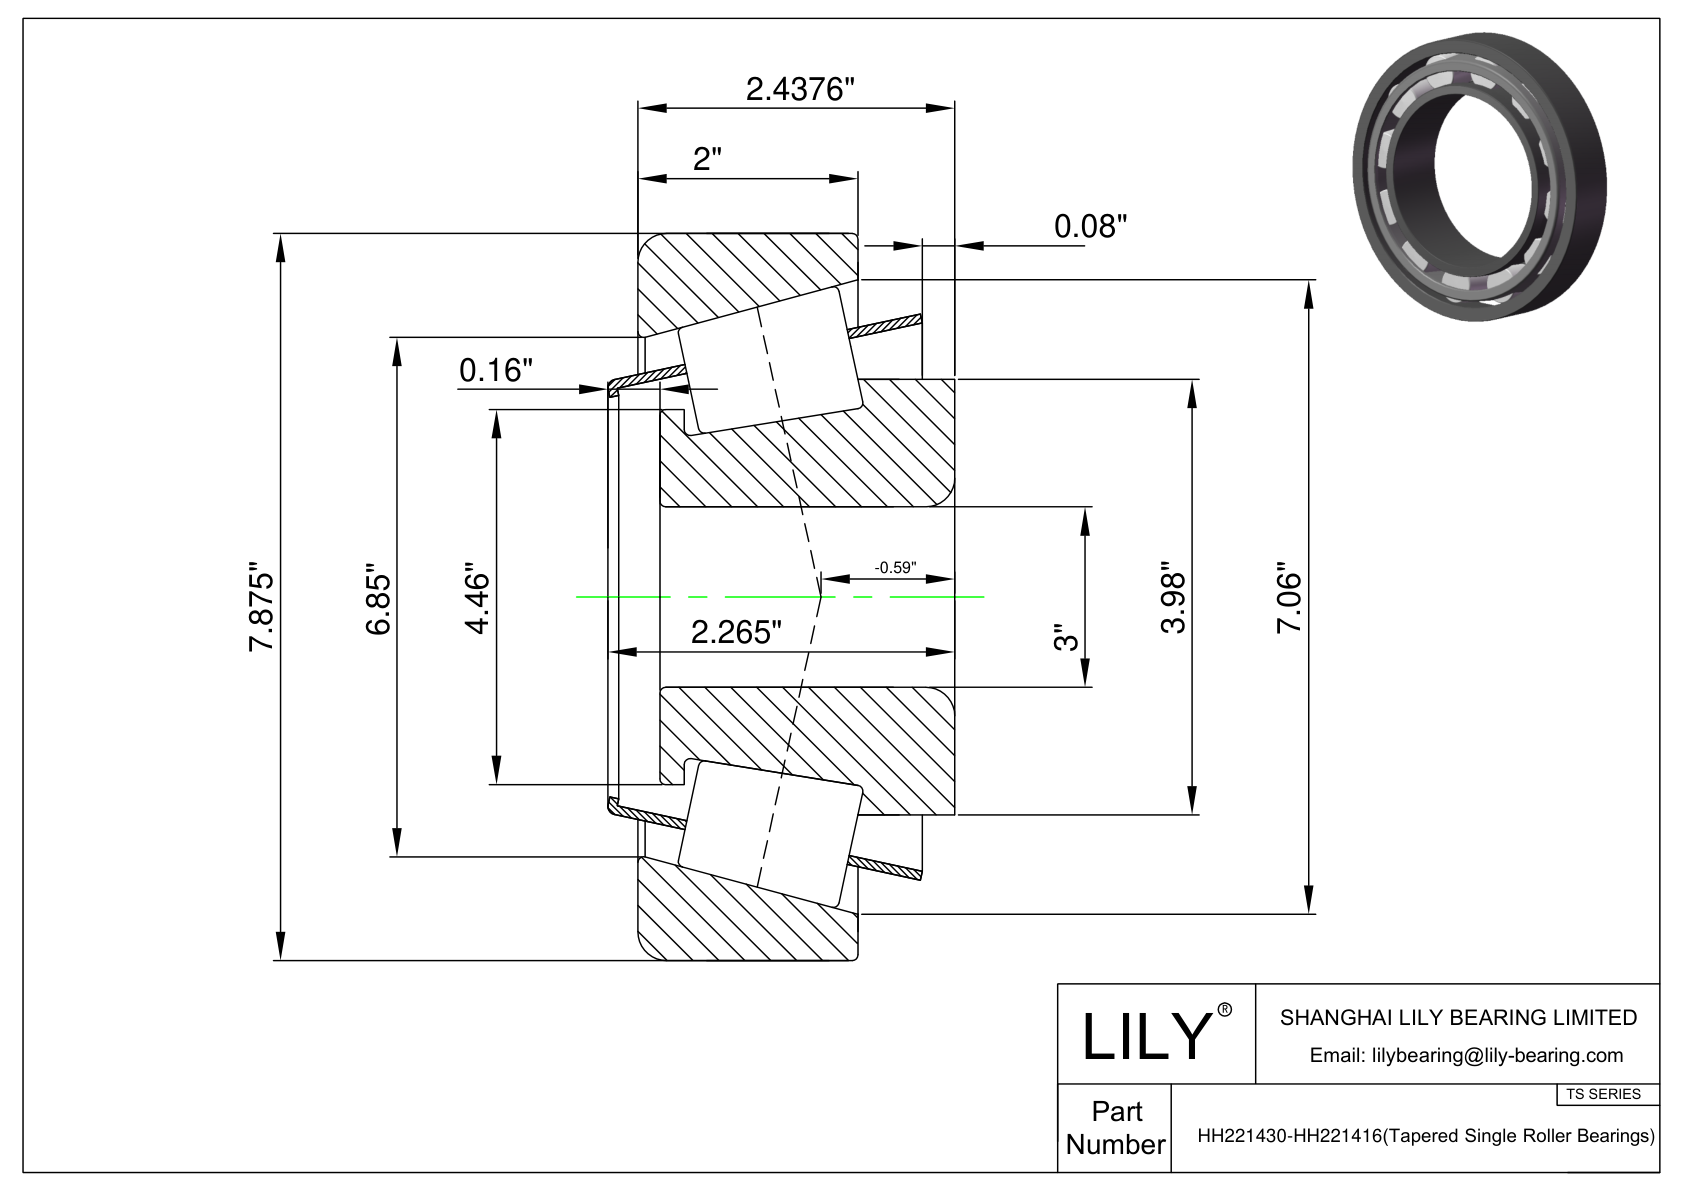 HH221430-HH221416 TS (Tapered Single Roller Bearings) (Imperial) cad drawing